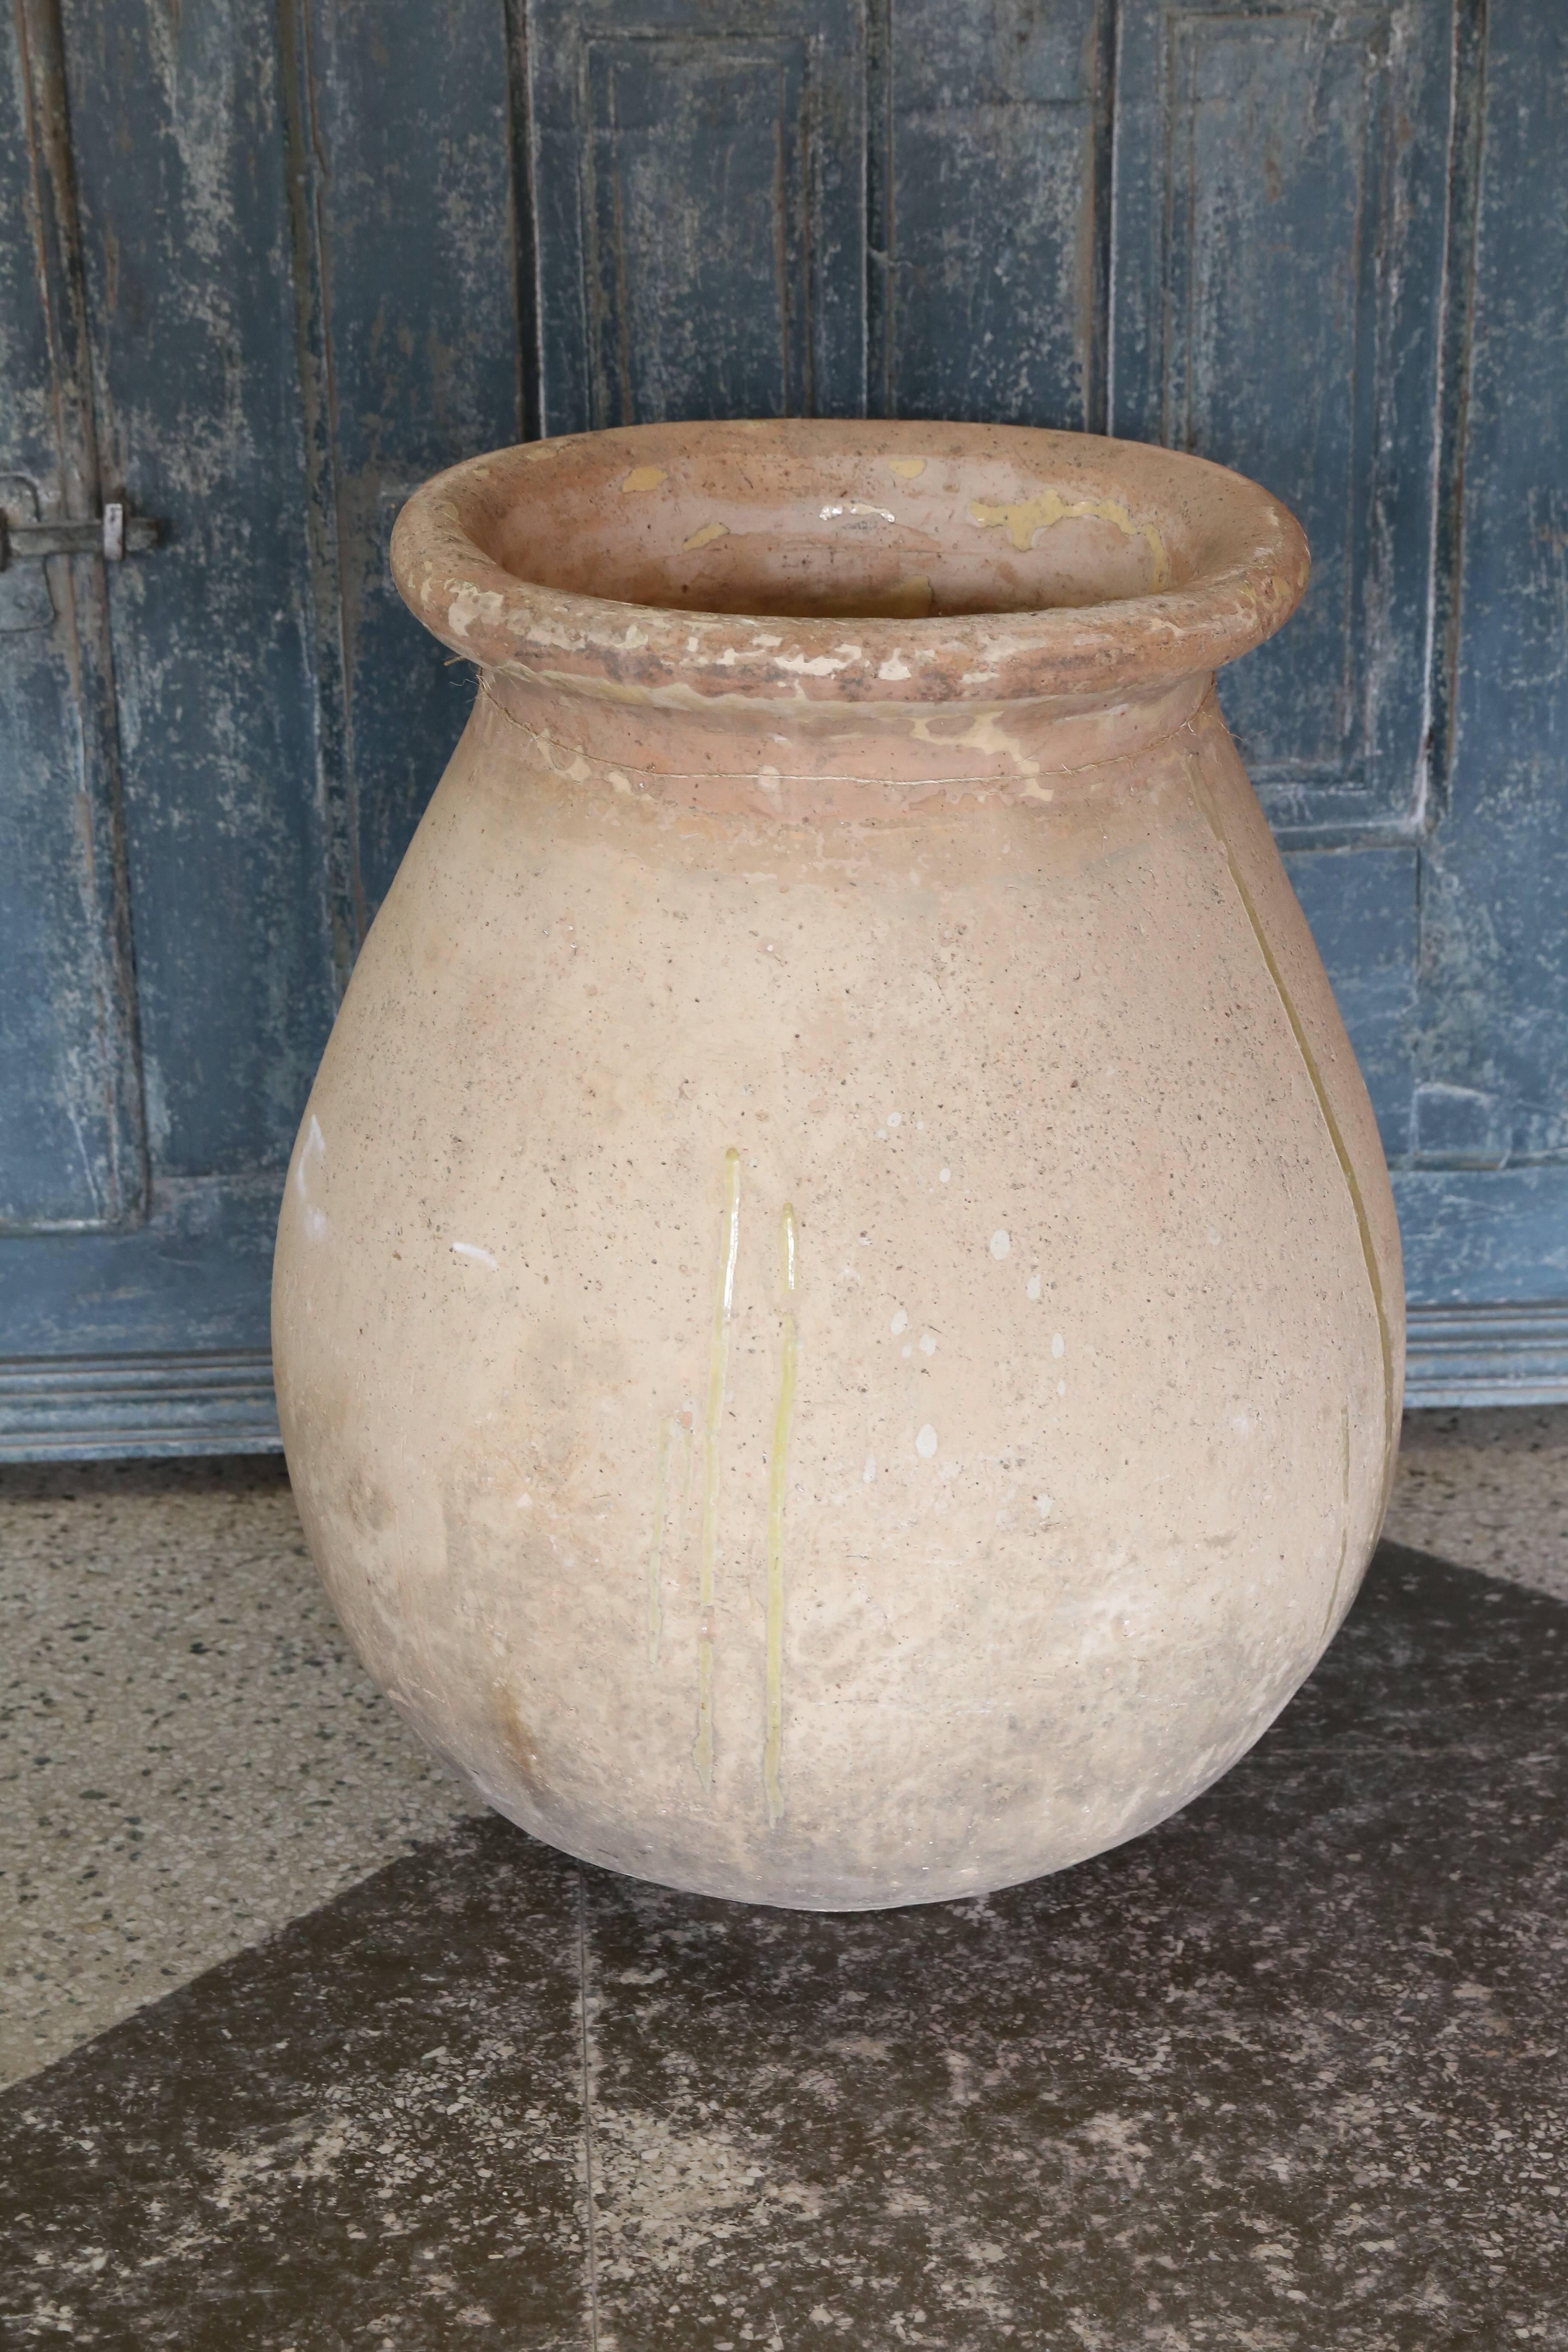 Late 19th Century Biot Jar from France